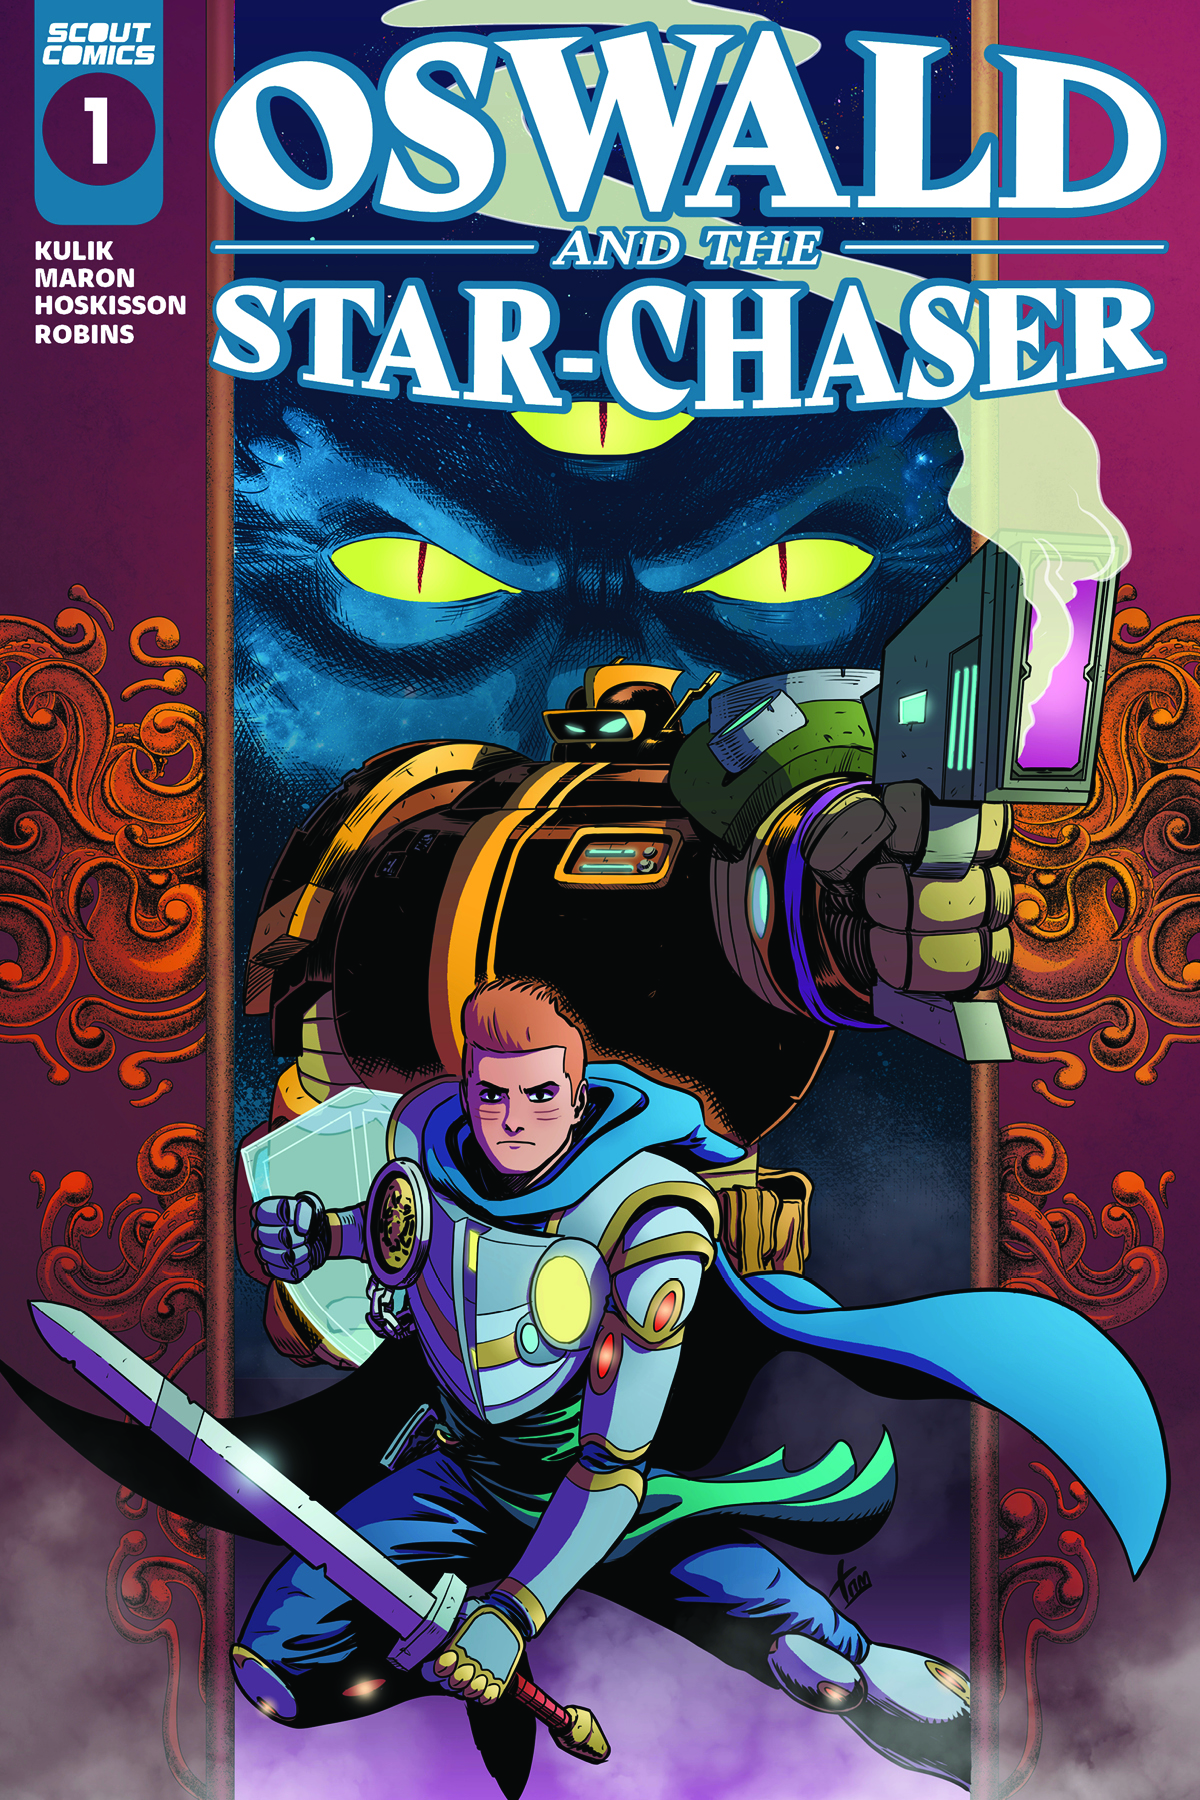 Oswald & Star Chaser #1 Cover A Tom Hoskisson (Of 6)